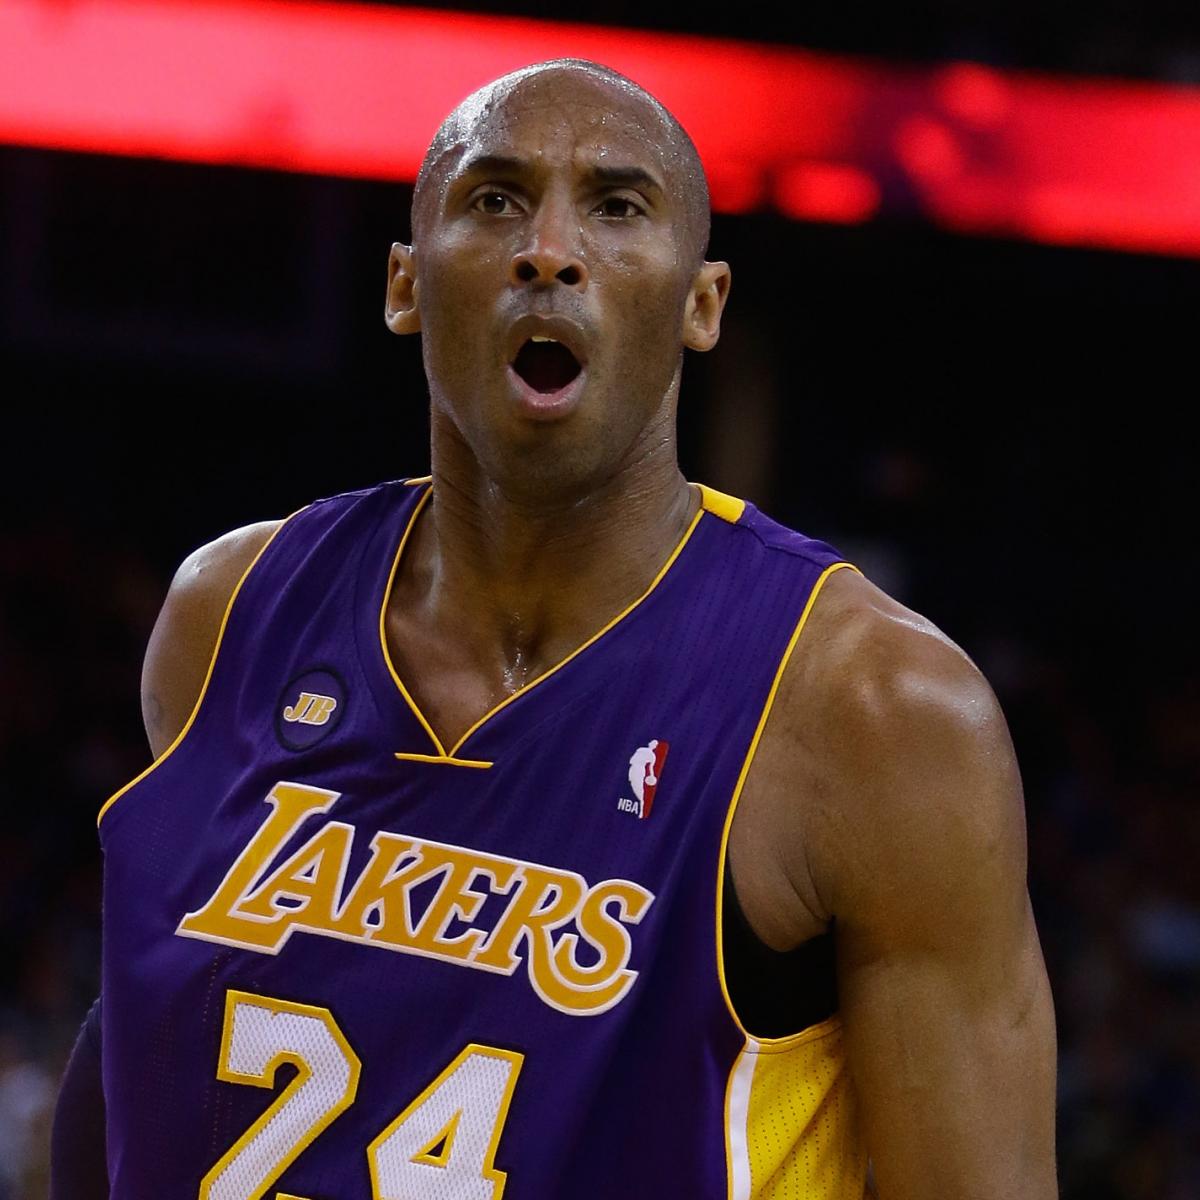 Despite Being Past His Prime, Kobe Bryant Came in Clutch to Win